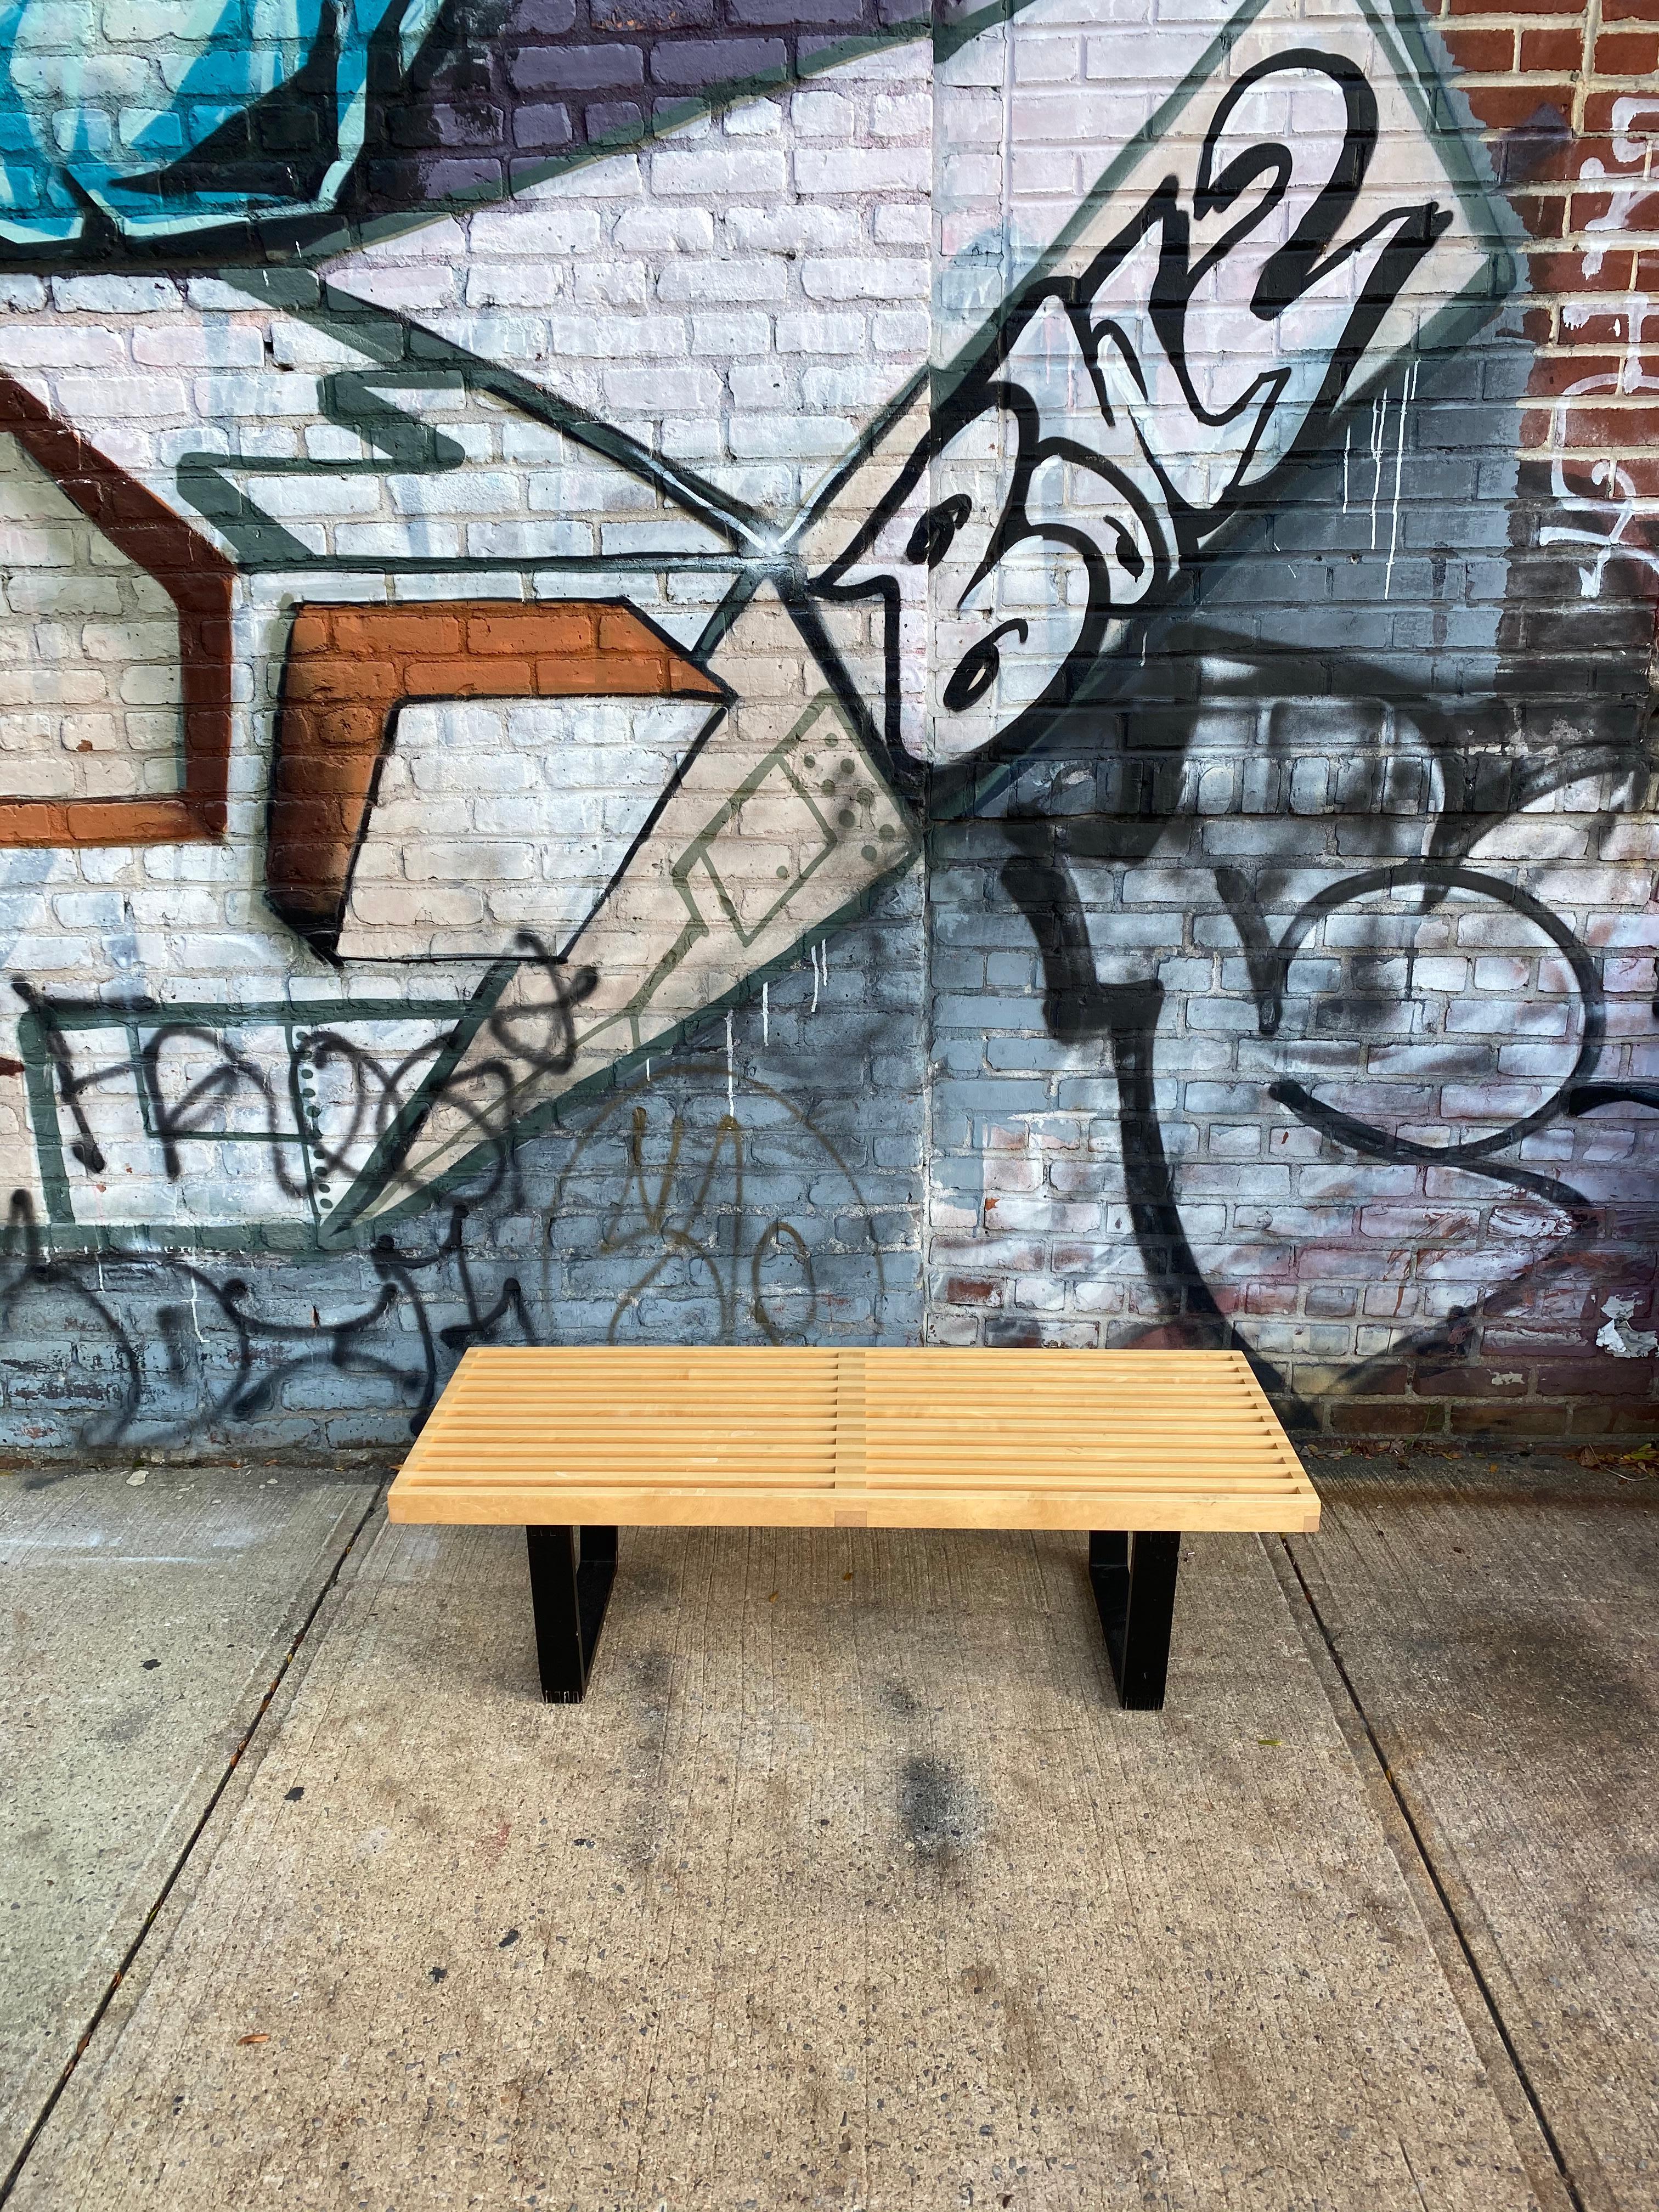 Classic example of the iconic George Nelson slat bench. Can be used as a coffee table. Solid and sturdy. Even appearance and patina. Presents well. Signed with original Herman Miller maker label.